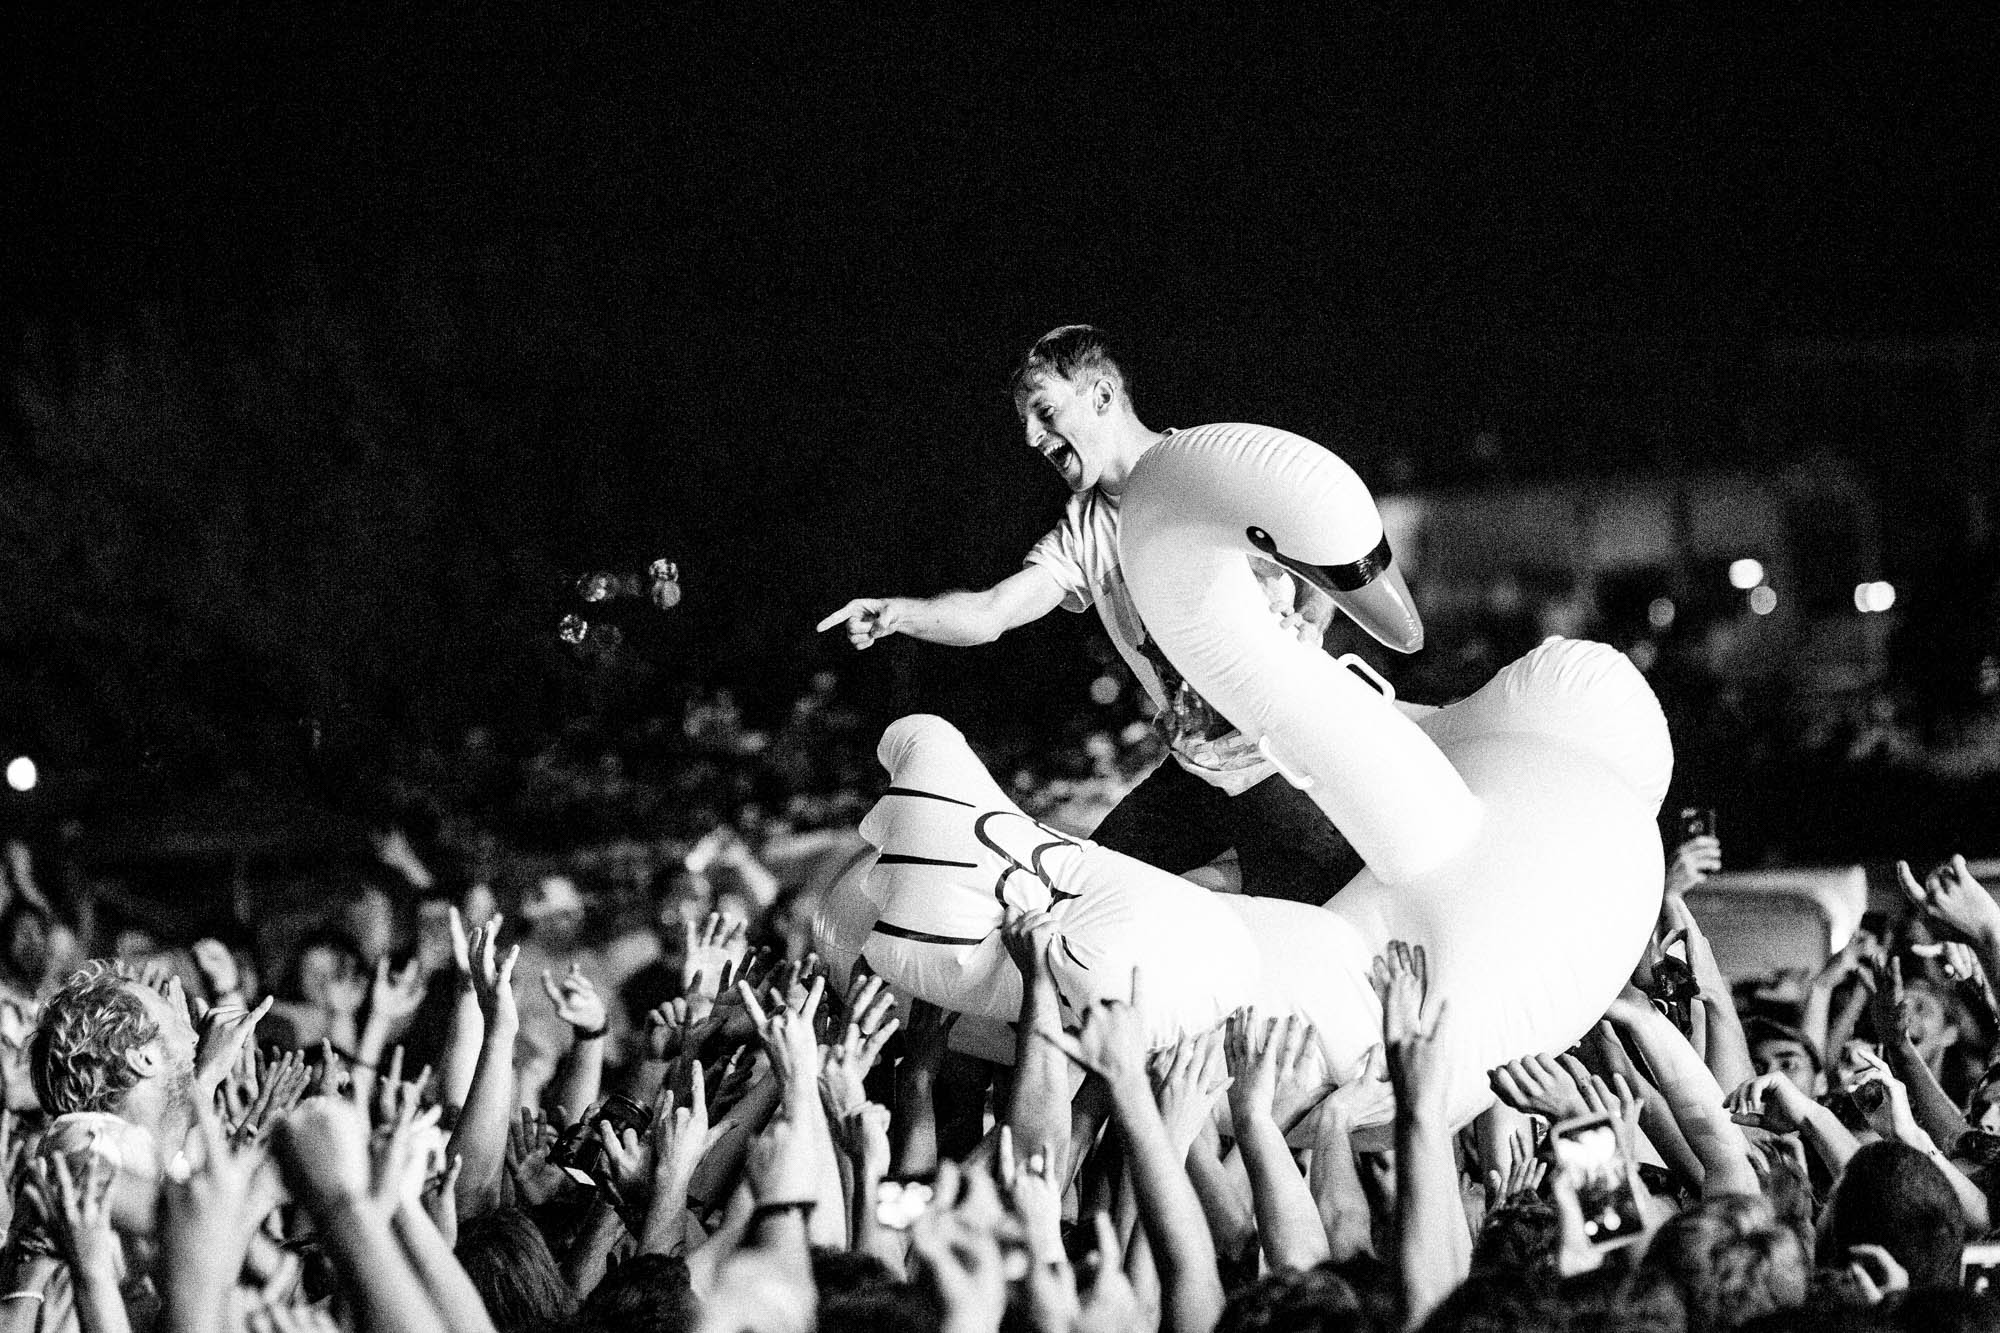 Stefan Babcock rides a large inflatable white duck through a concert crowd on Echo Beach in Toronto, held aloft by hundreds of hands. He is dressed casually in a white graphic t-shirt. He points outward to the audience while smiling.